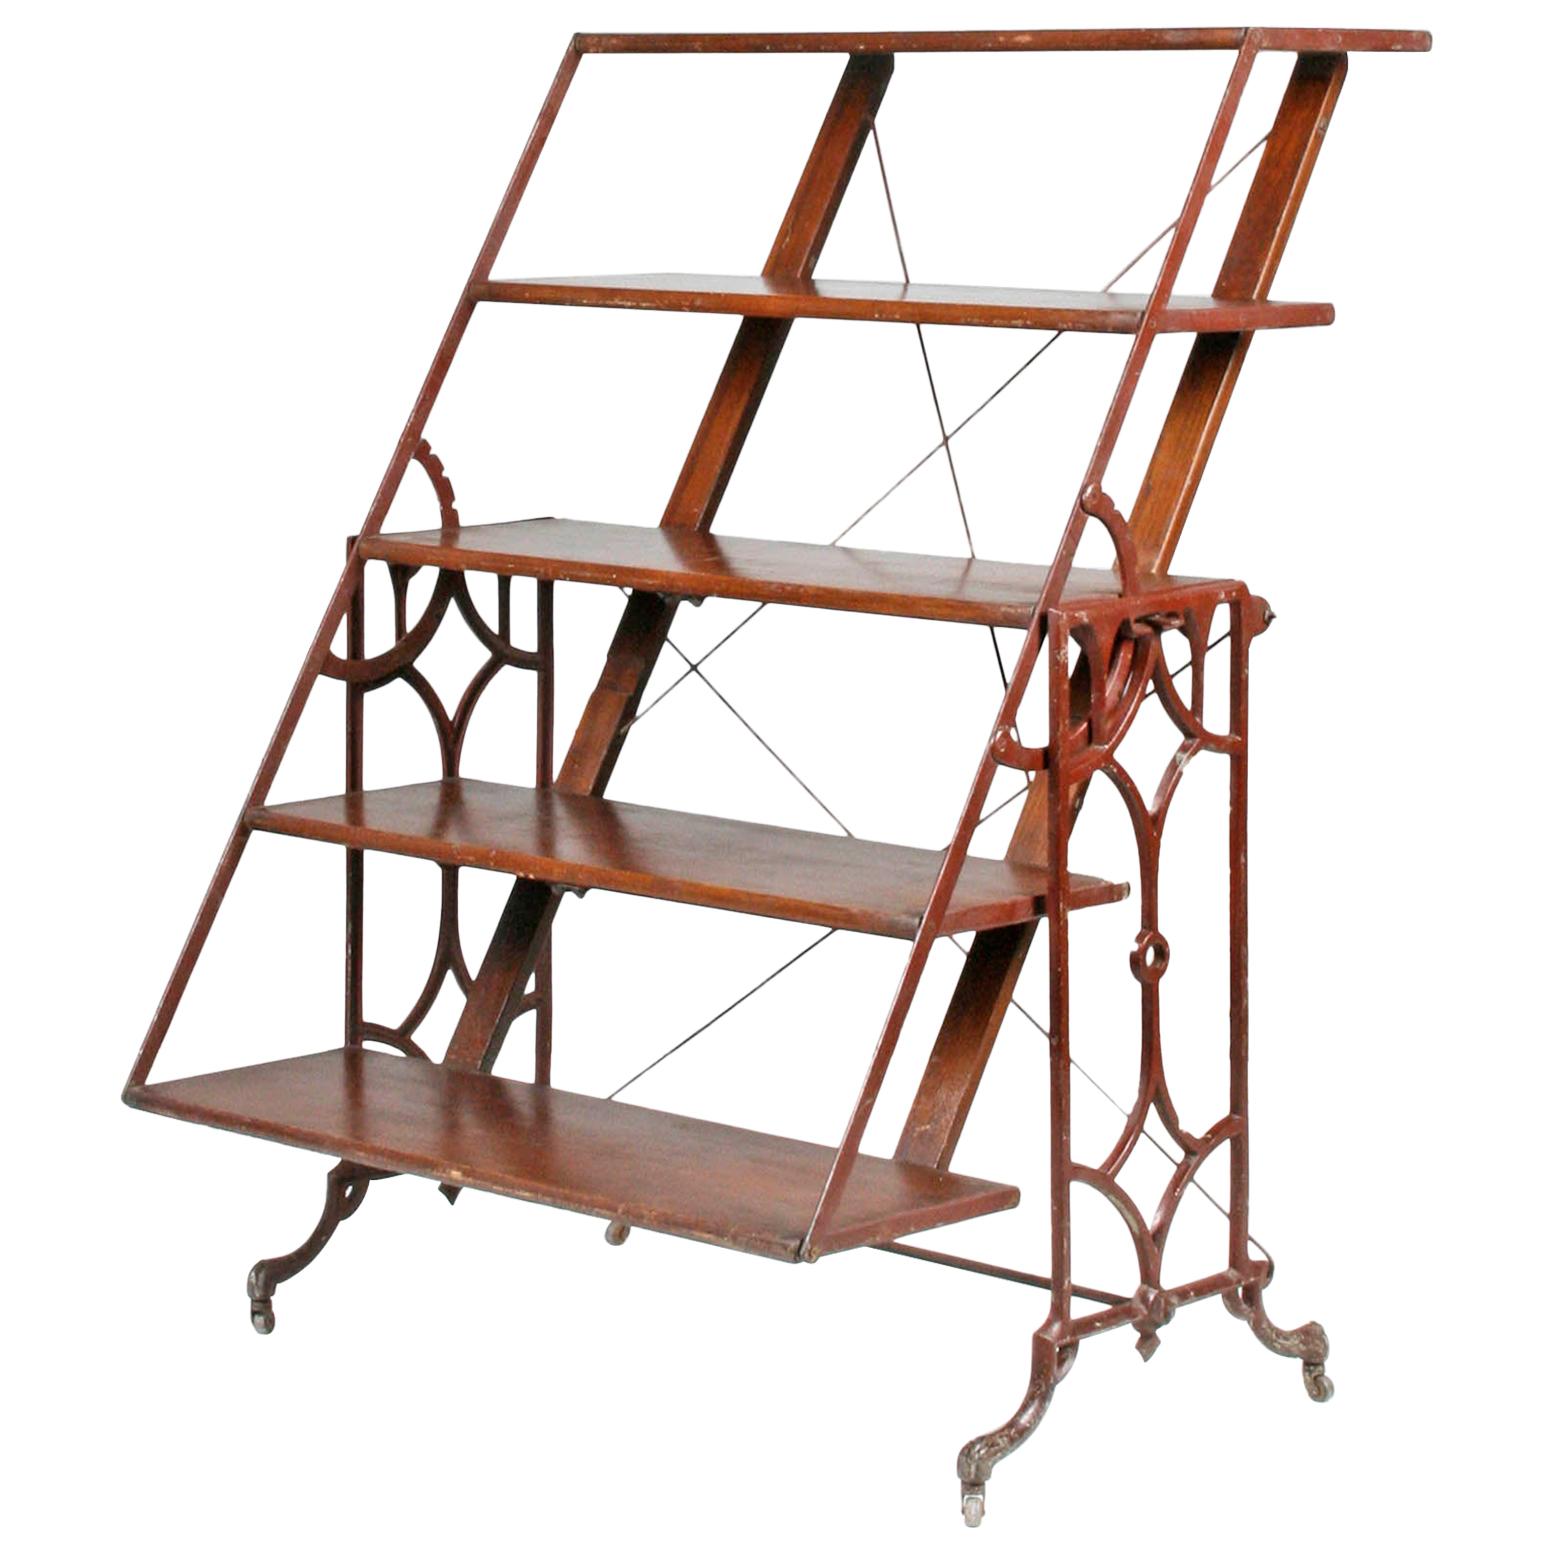 Antique Folding Shelf / Table, Boeckh Brothers, Canada